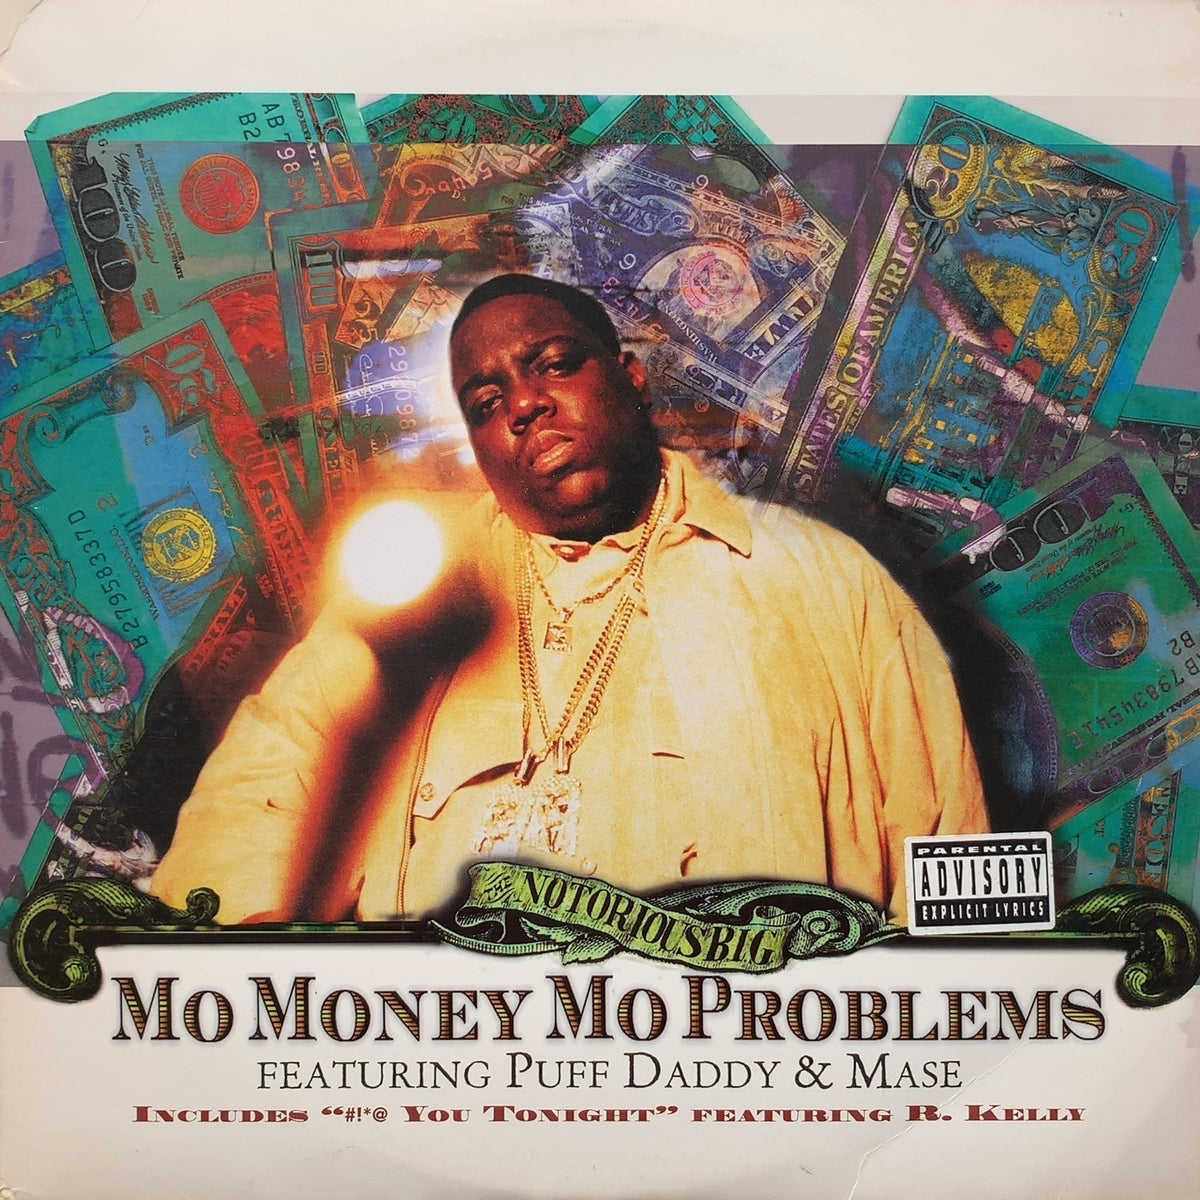 NOTORIOUS B.I.G. / Mo Money Mo Problems (78612-79109-1, 12inch 